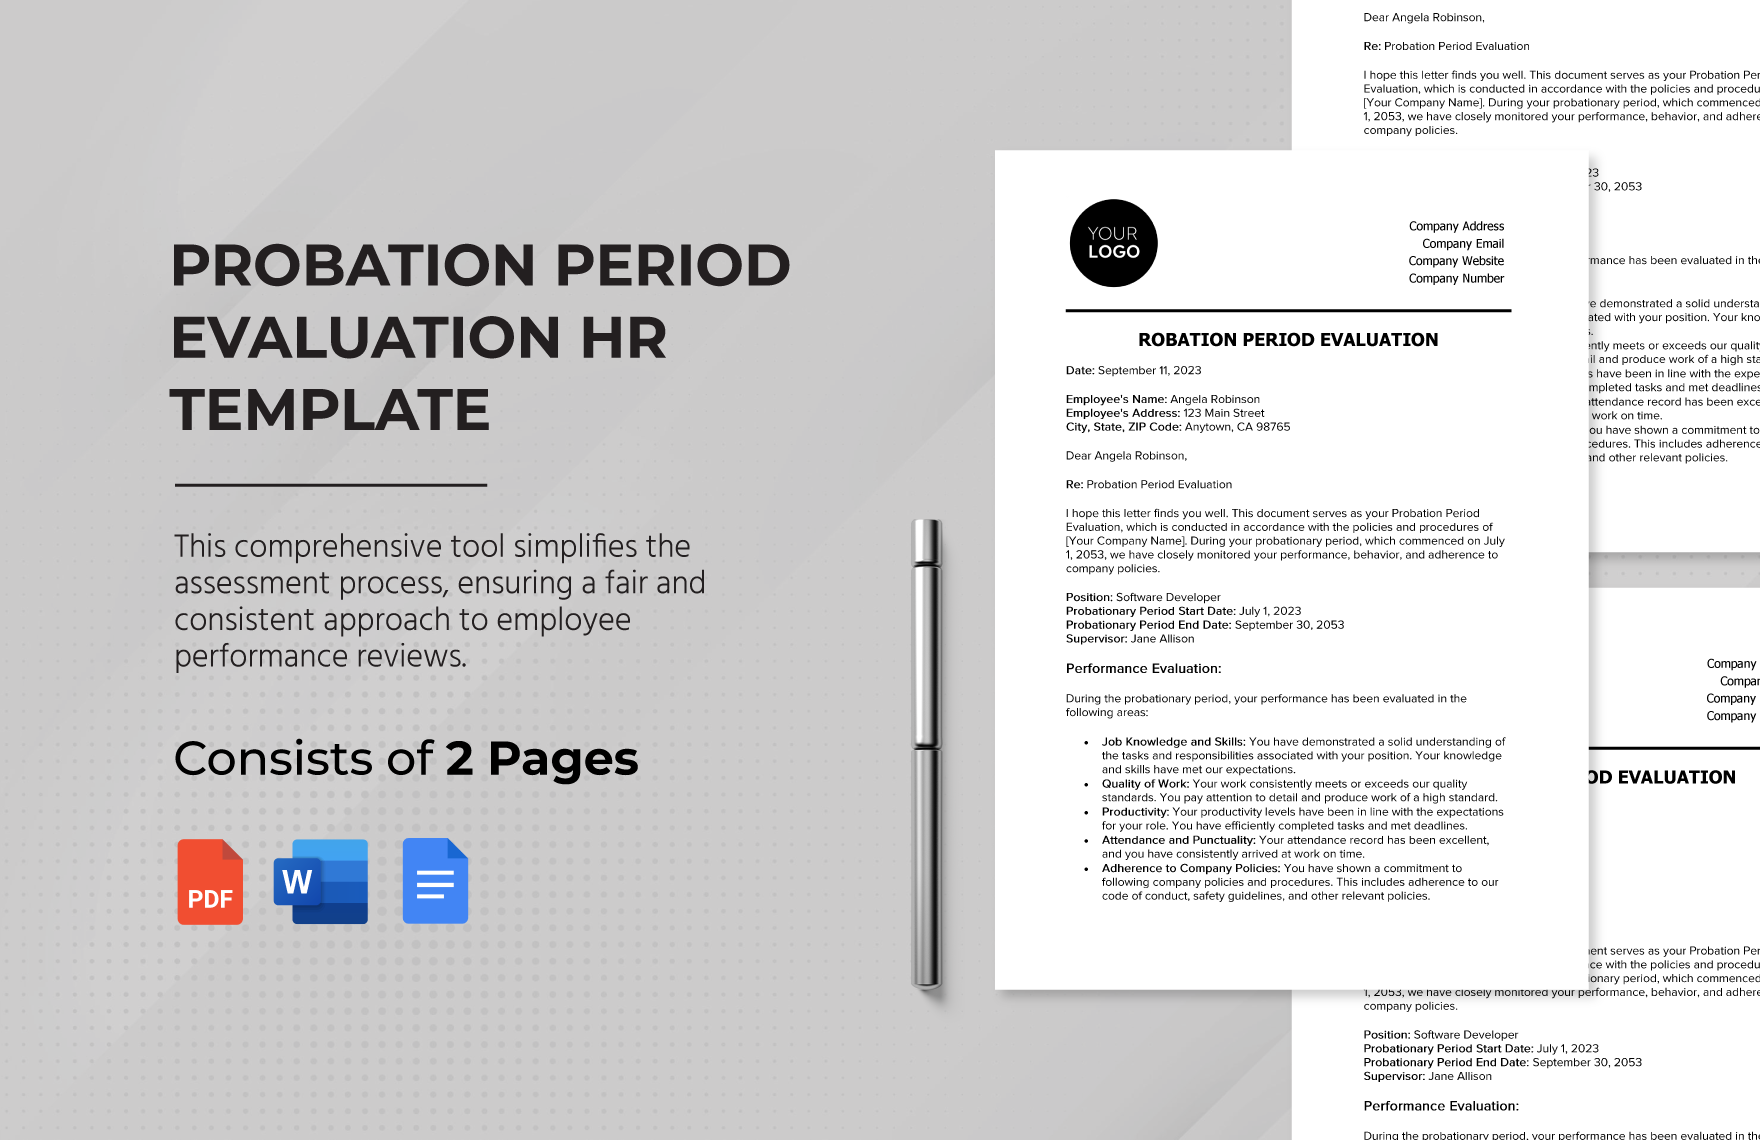 Probation Period Evaluation HR Template in Word, Google Docs, PDF